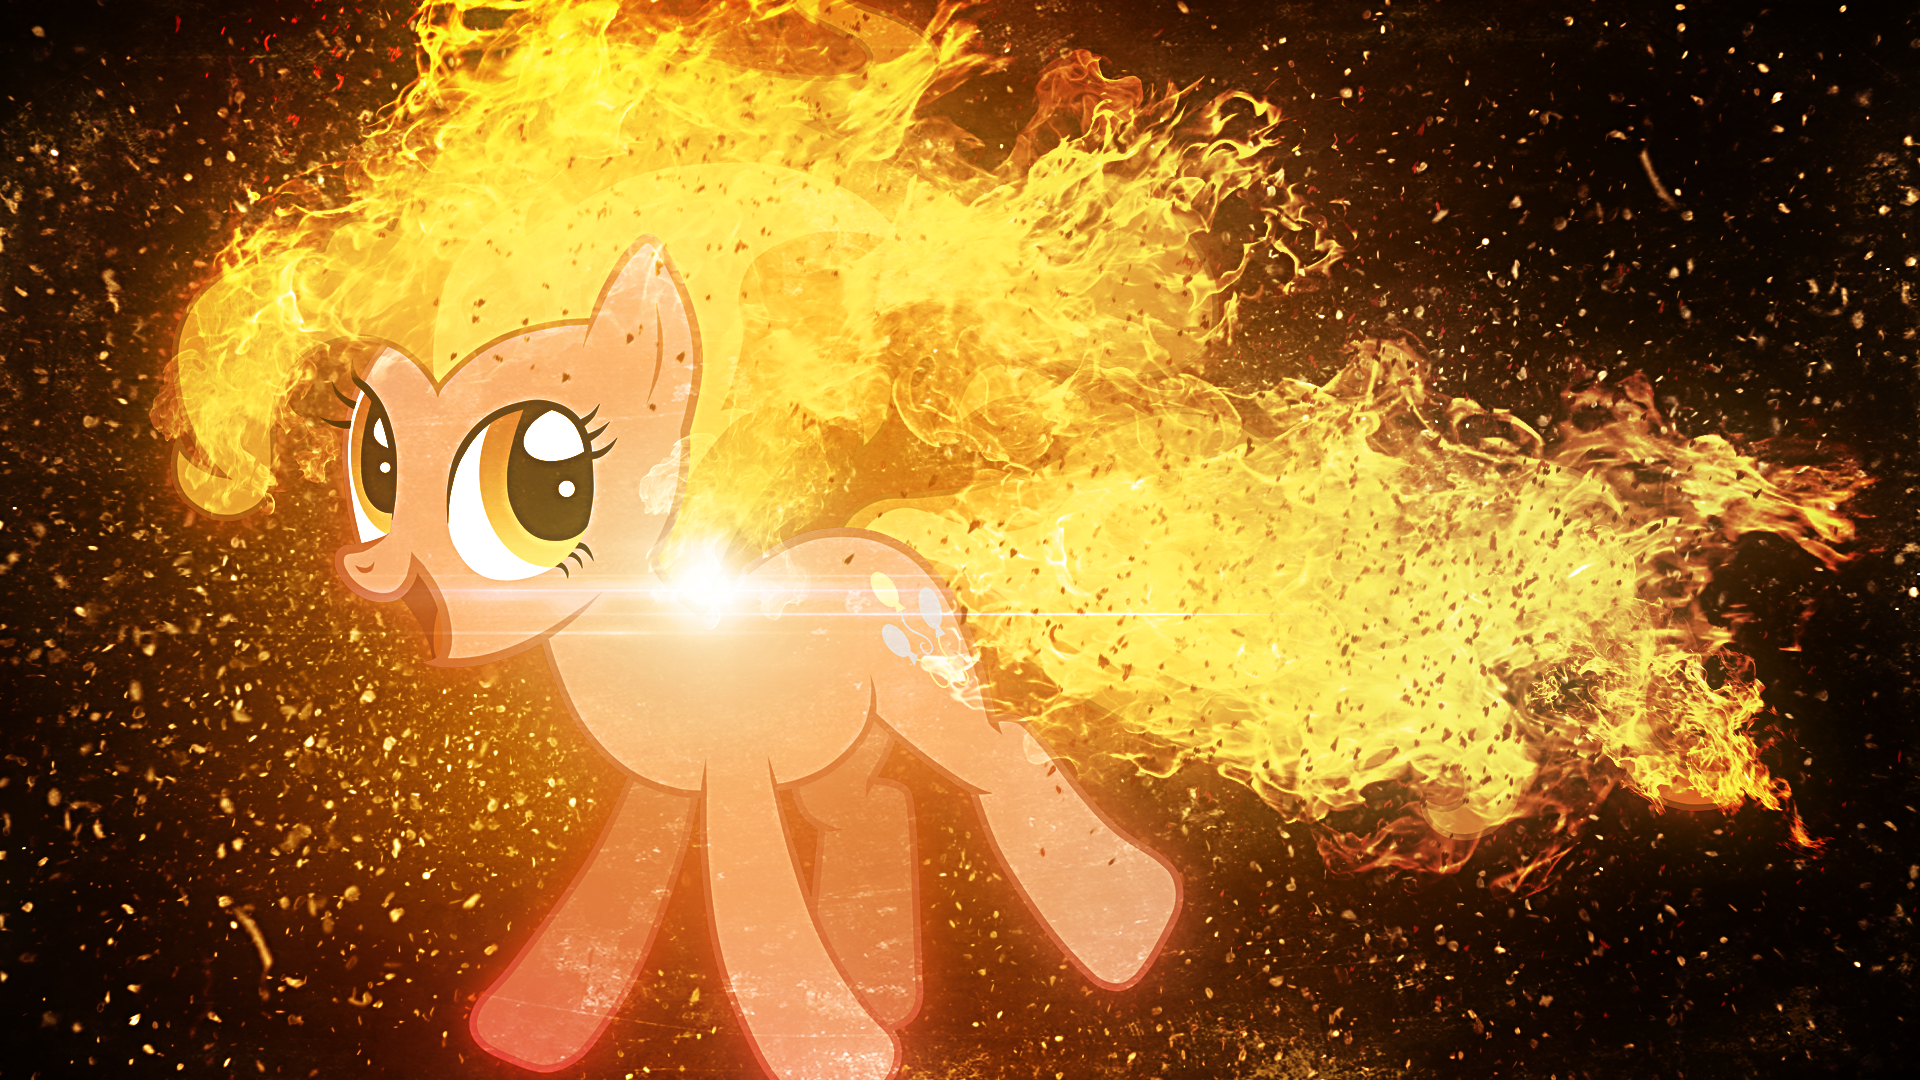 Element Of Fire - Wallpaper by JennieOo and Tzolkine